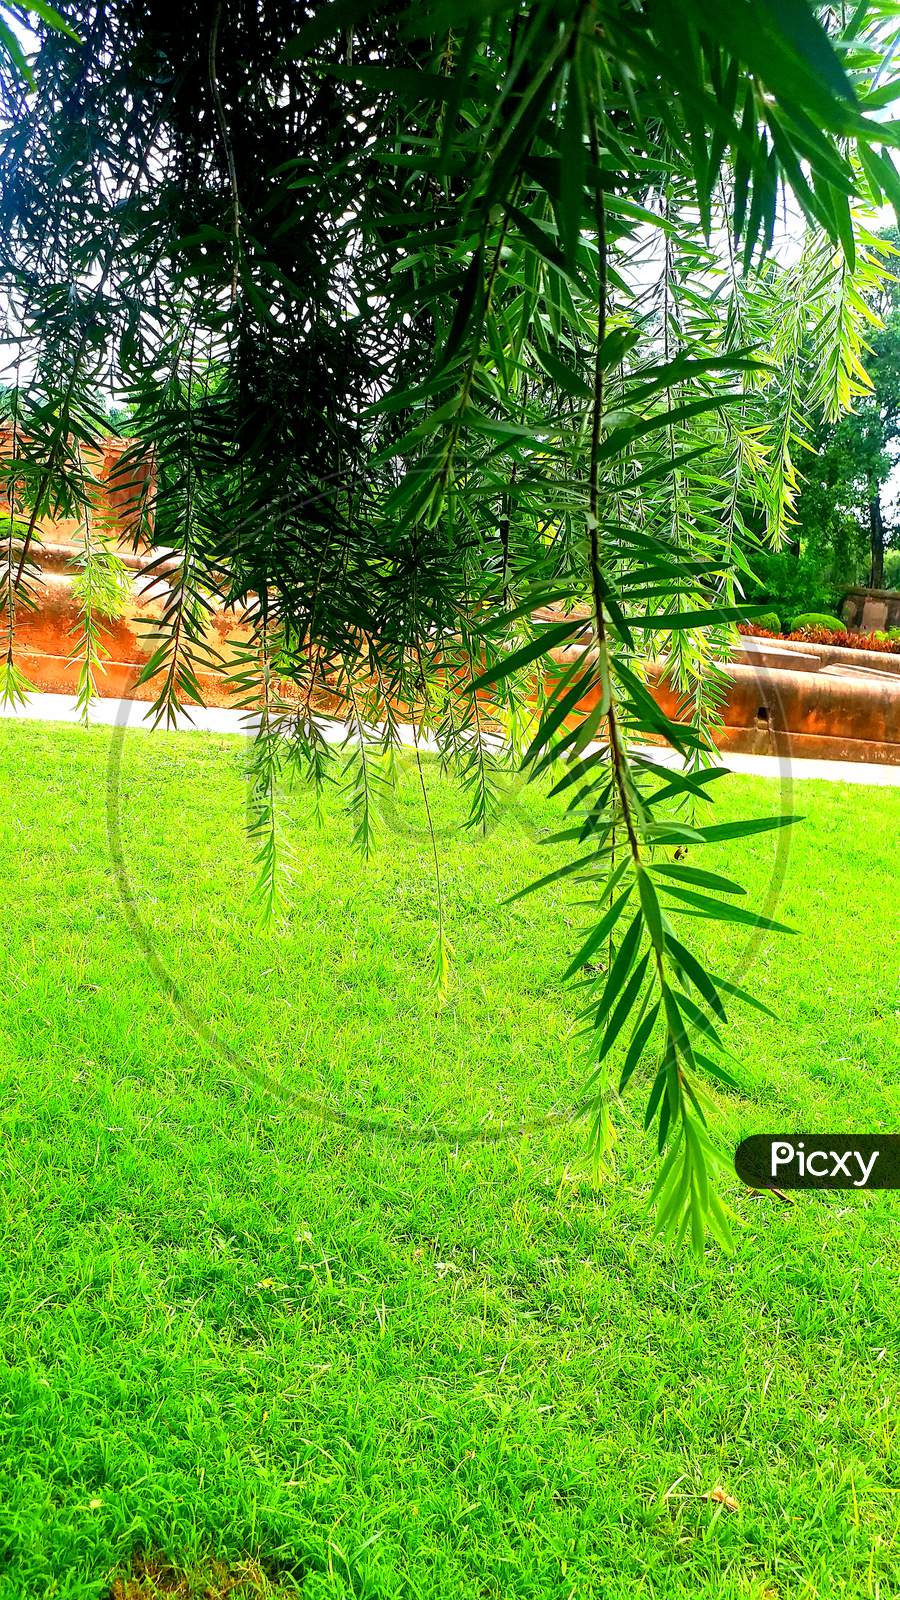 Green leaf coming down from trees branches garden grass cemetary passageway asia india